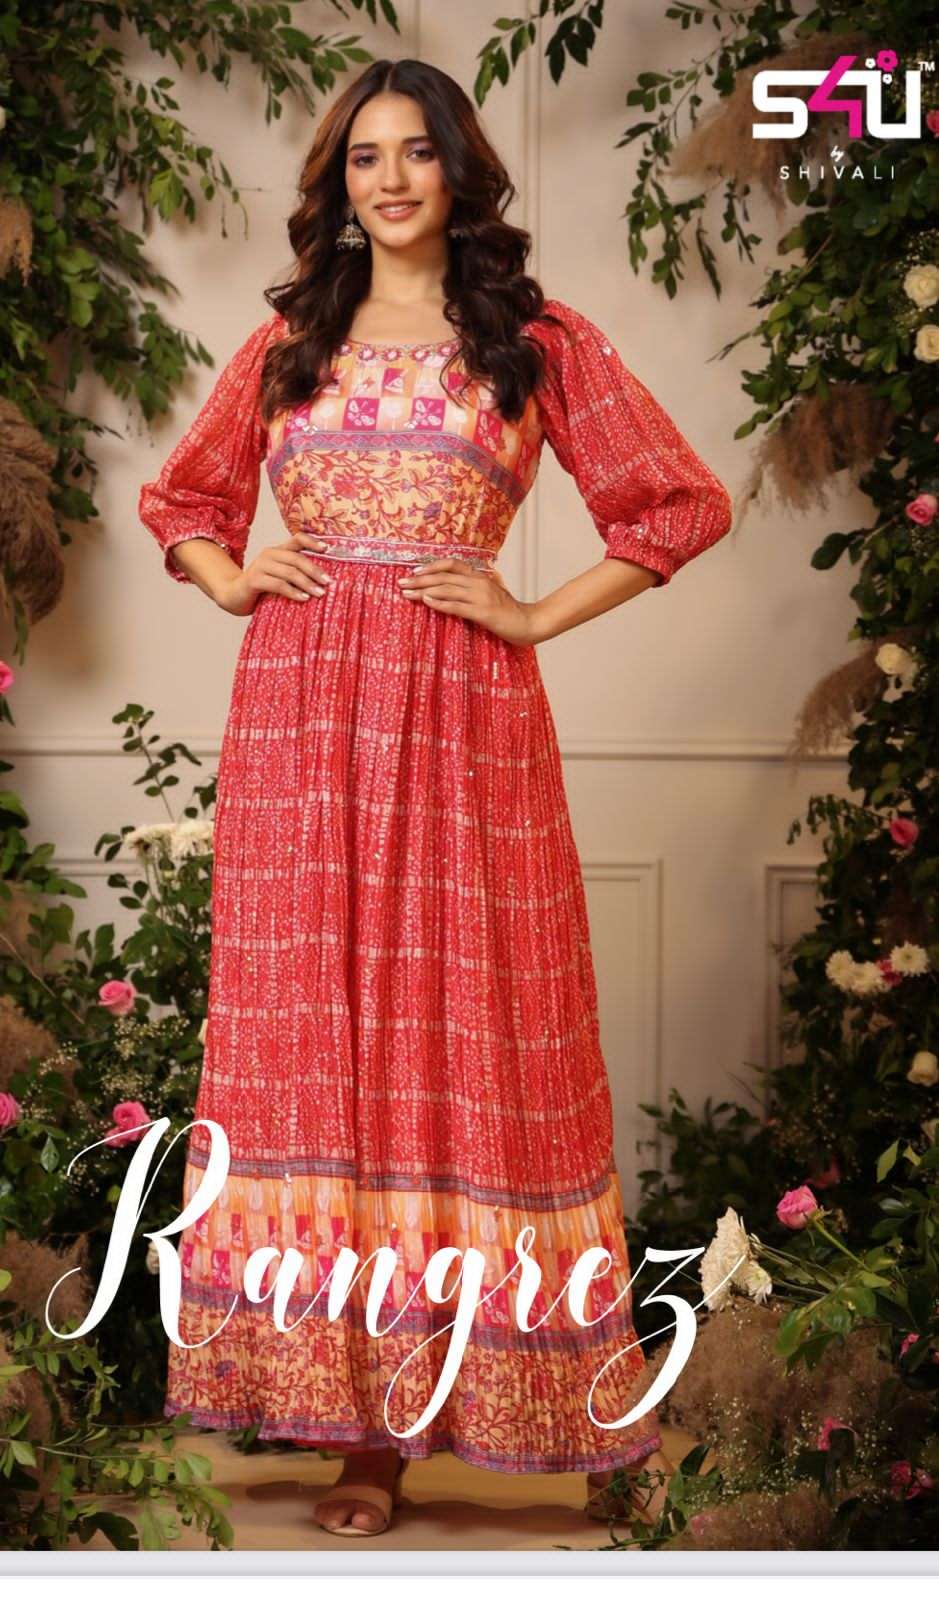 RANGREZ VOL 2 BY S4U BY SHIVALI BRAND SEQUENCE CHINON WITH NECKLINE WORK WITH HANDWORK BELT WHOLESAL...